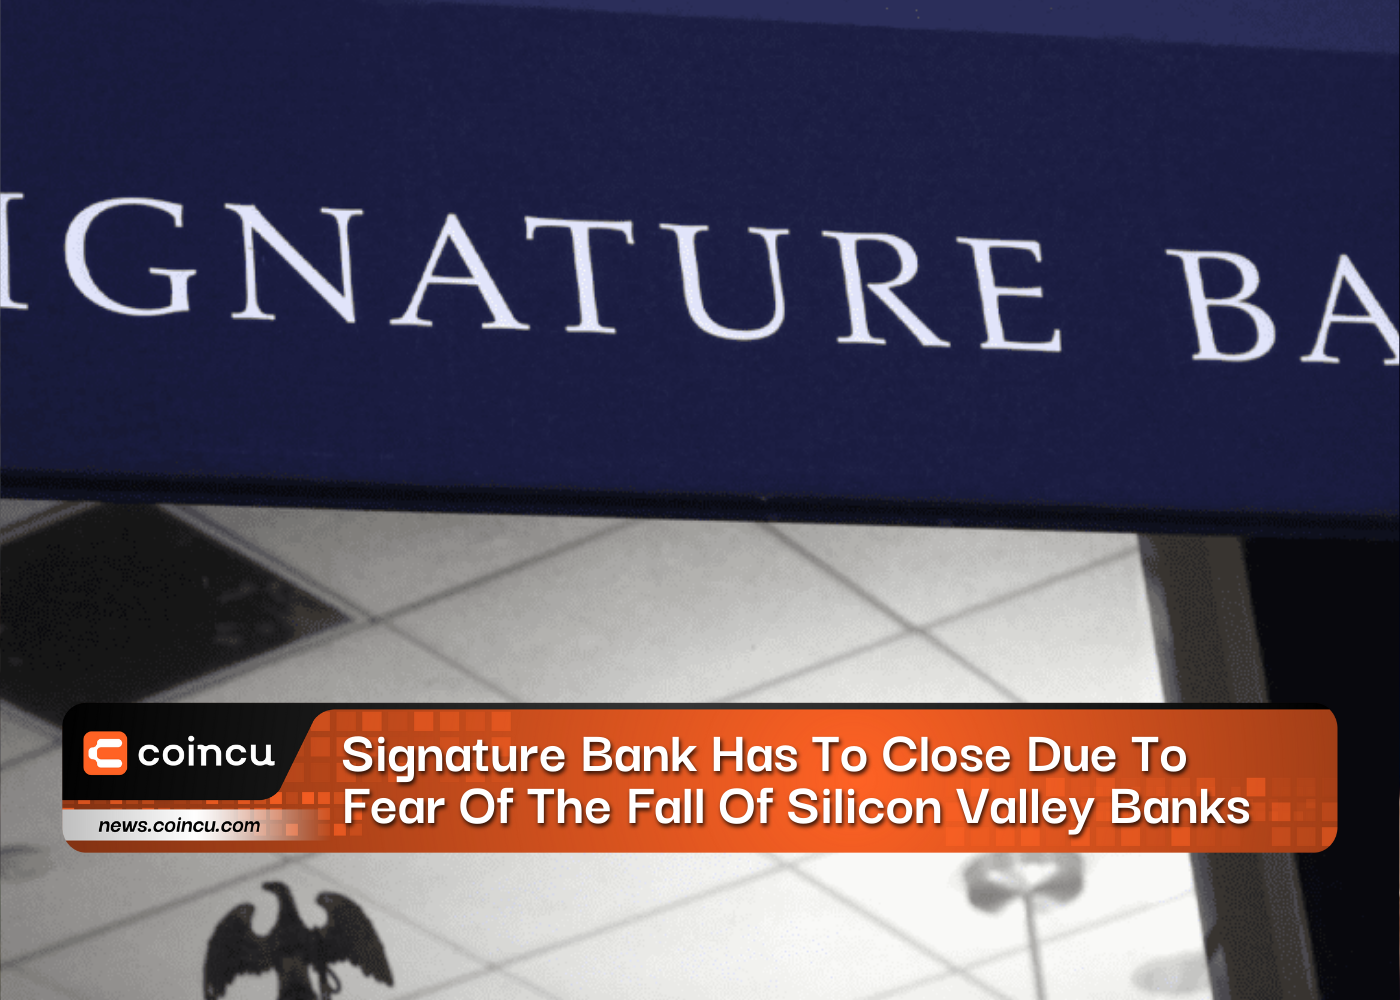 Signature Bank Has To Close Due To Fear Of The Fall Of Silicon Valley Banks